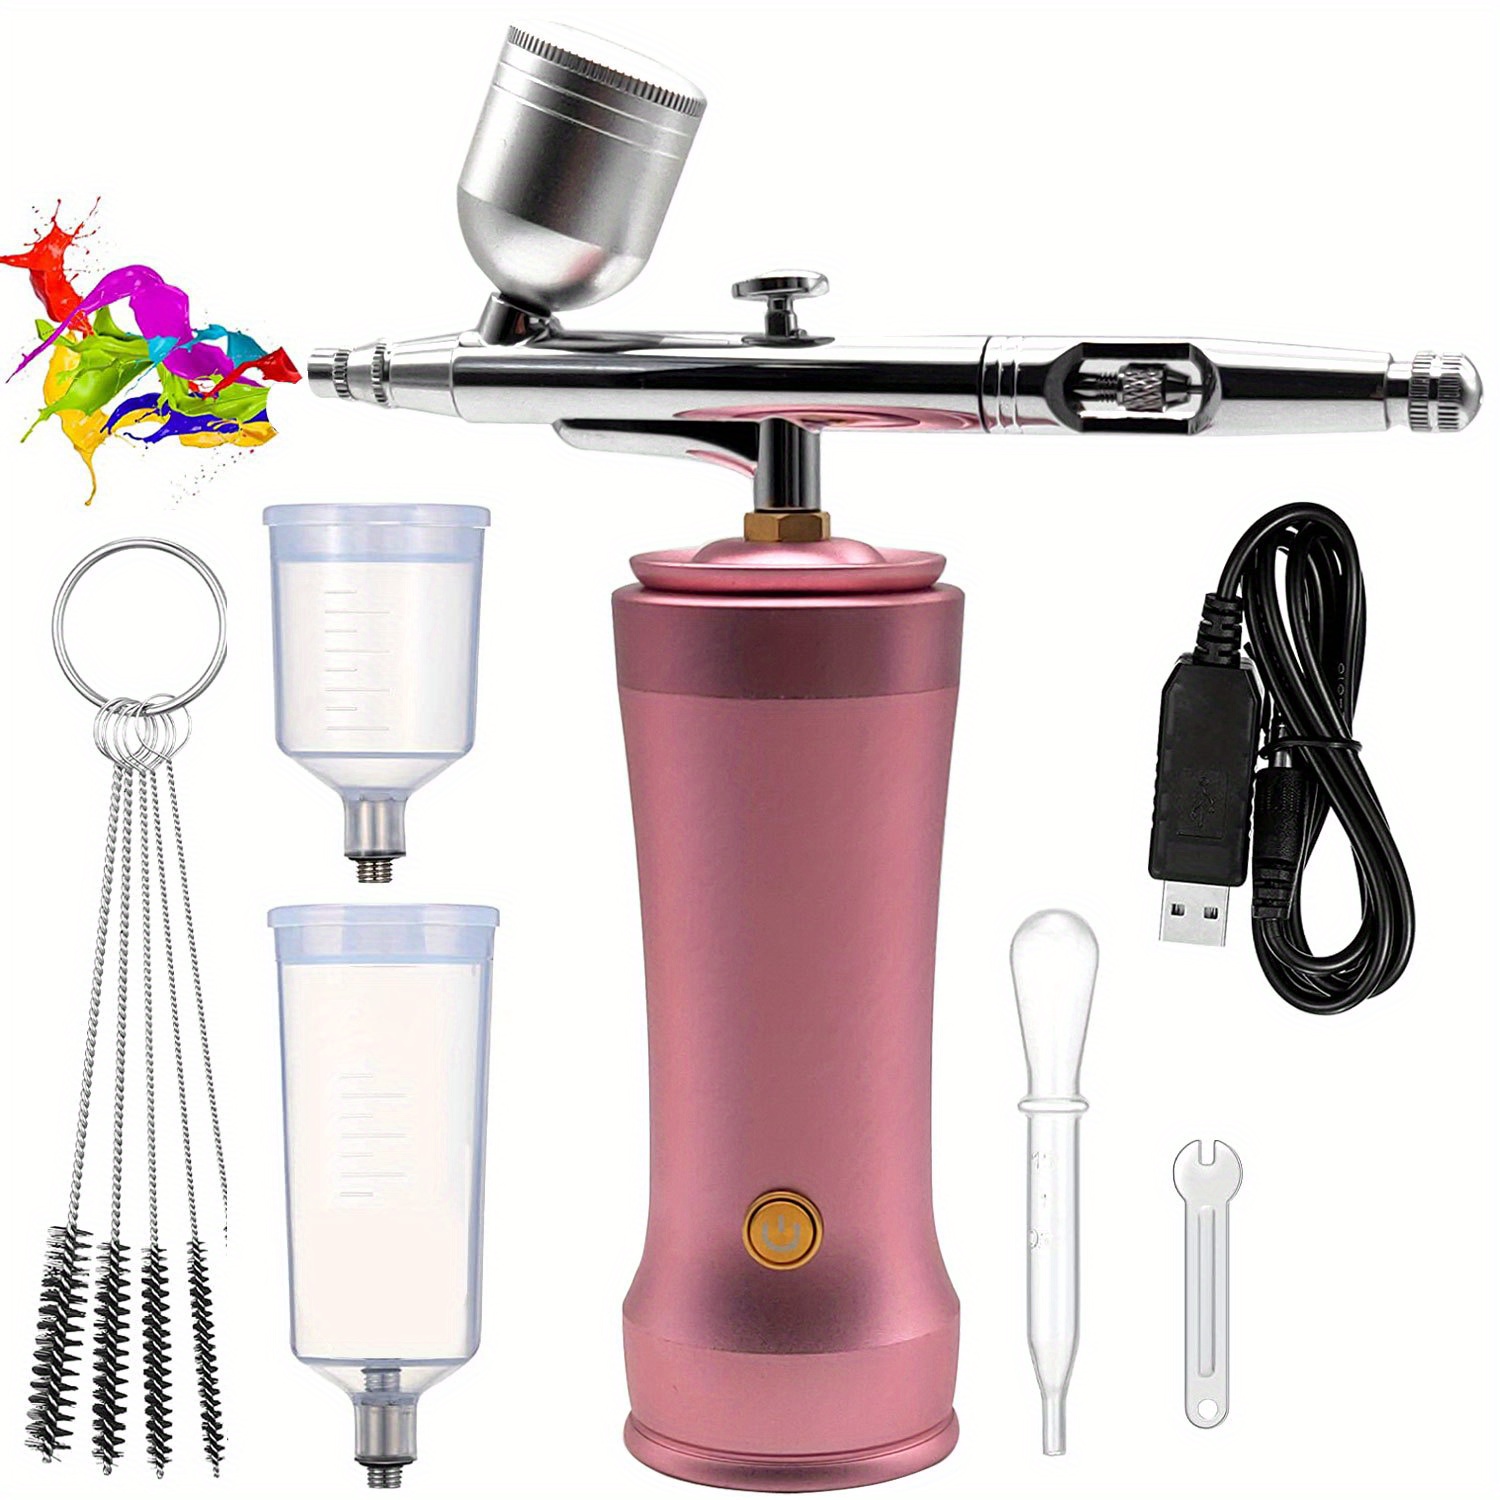  Airbrush Rechargeable Cordless Airbrush-Kit Compressor - 30PSI  High Pressure Airbrush Gun Wireless Air Brush for Model  Painting,Makeup,Barber, Nail Art, Cake Decor : Arts, Crafts & Sewing